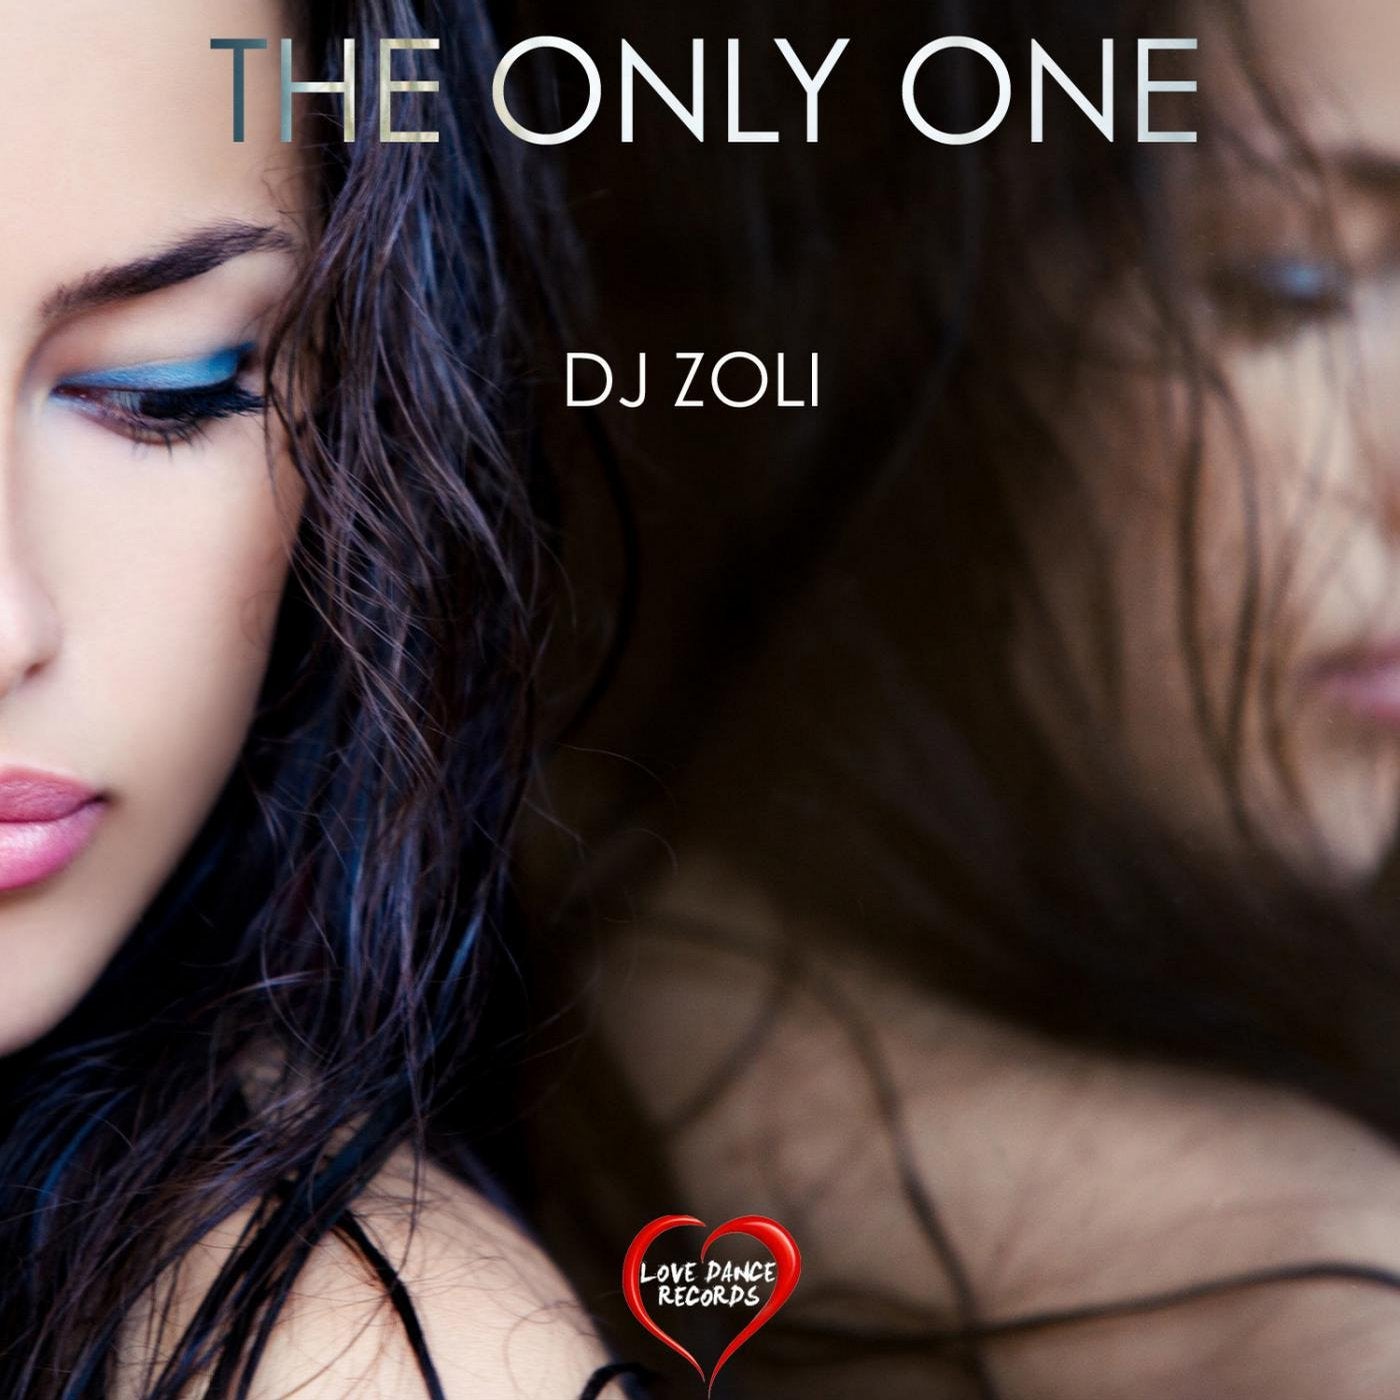 The Only One - Single